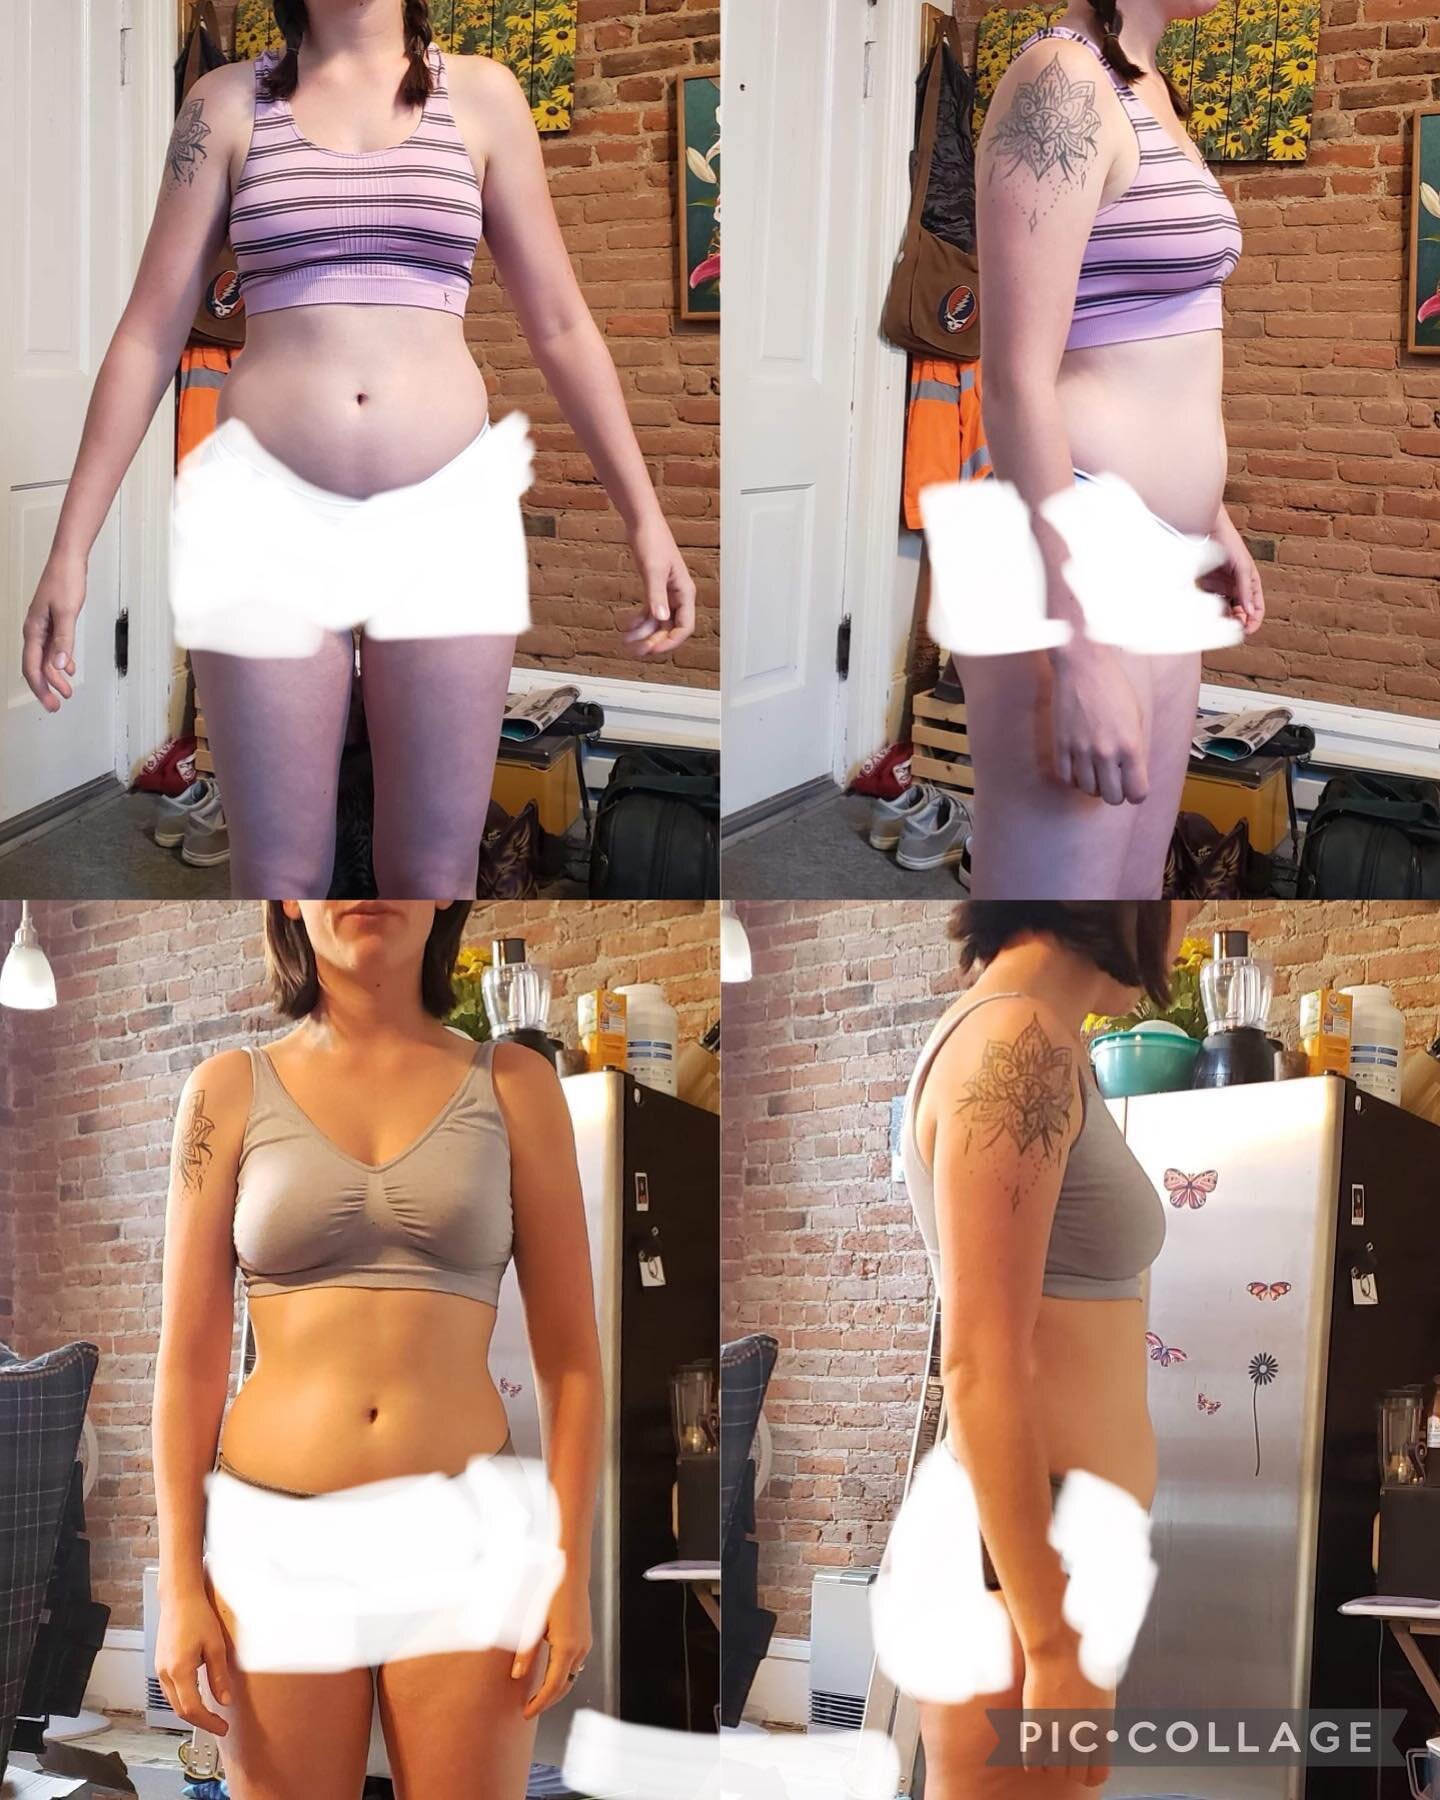 This is ONE MONTH of nutrition coaching. 

Client: @kristin_of_lakecity 

Top photos: 114.2lbs, consuming LESS THAN 1000 calories
Bottom photos: 112.2lbs, consuming ~1900 calories

The abdominal muscles are more defined, the hips are leaner, while th